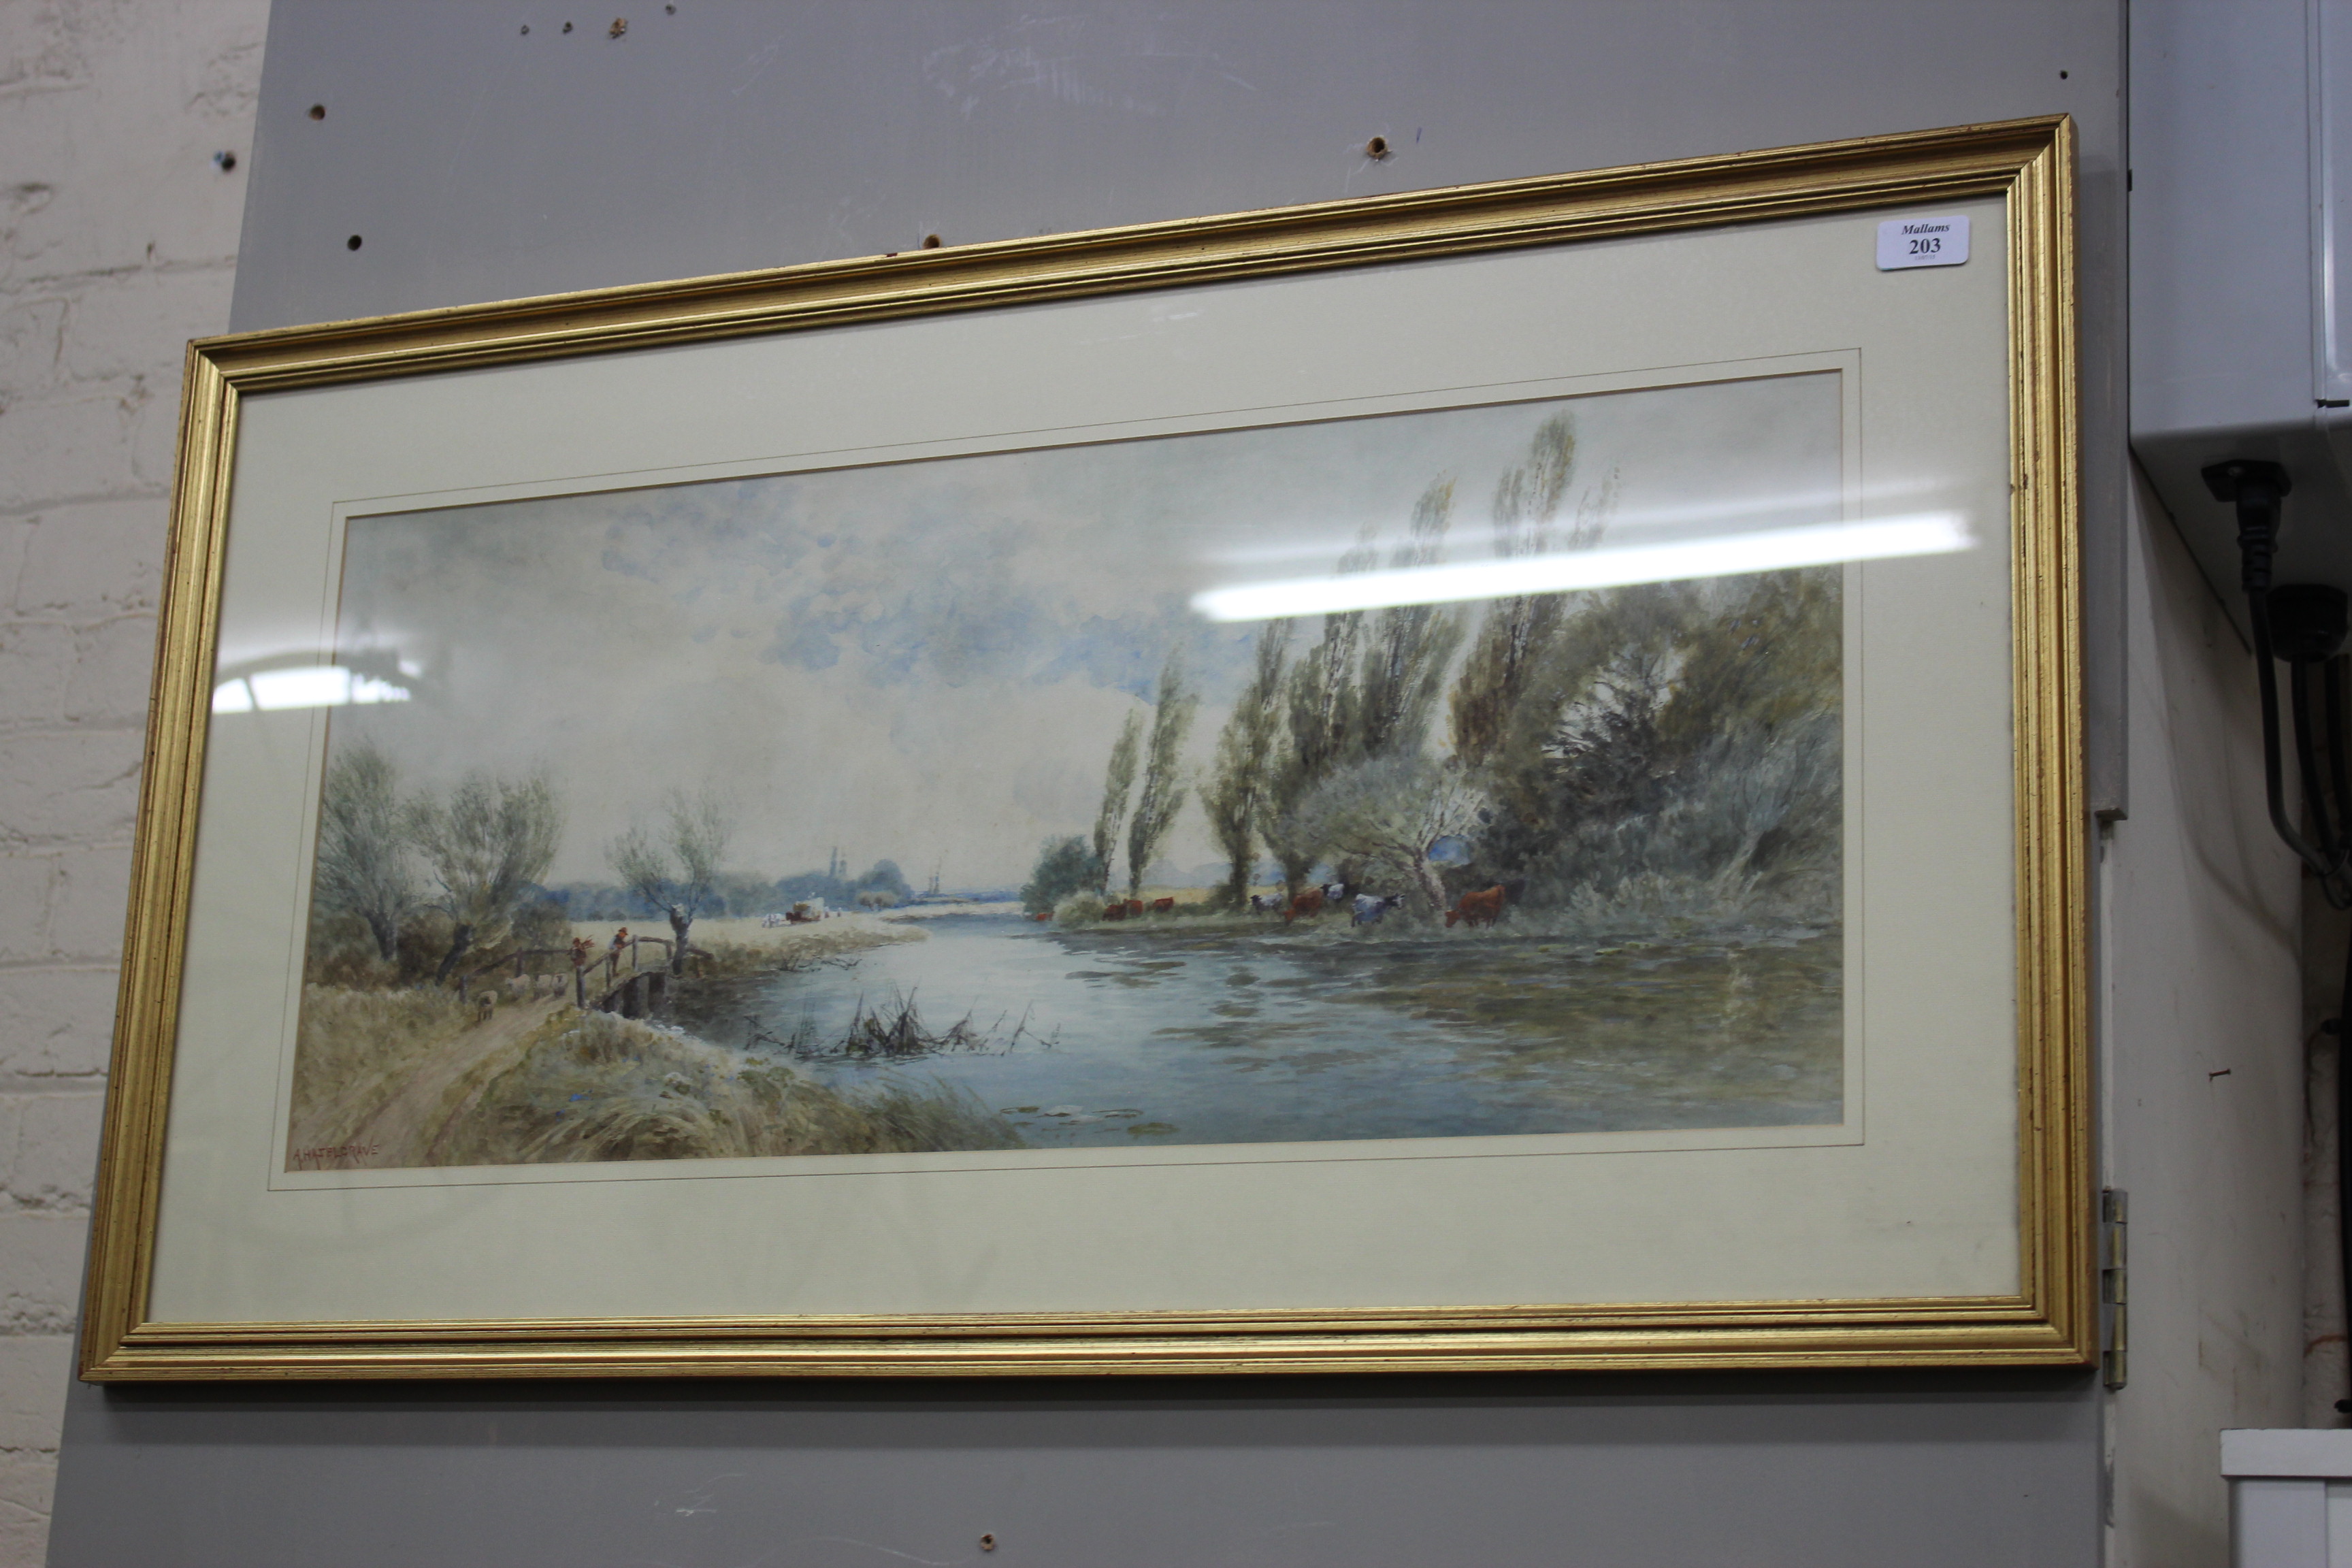 ADELAIDEL. HASLEGRAVE (1857-20TH CENTURY) 'A Peaceful Day on the River', watercolour, signed lower